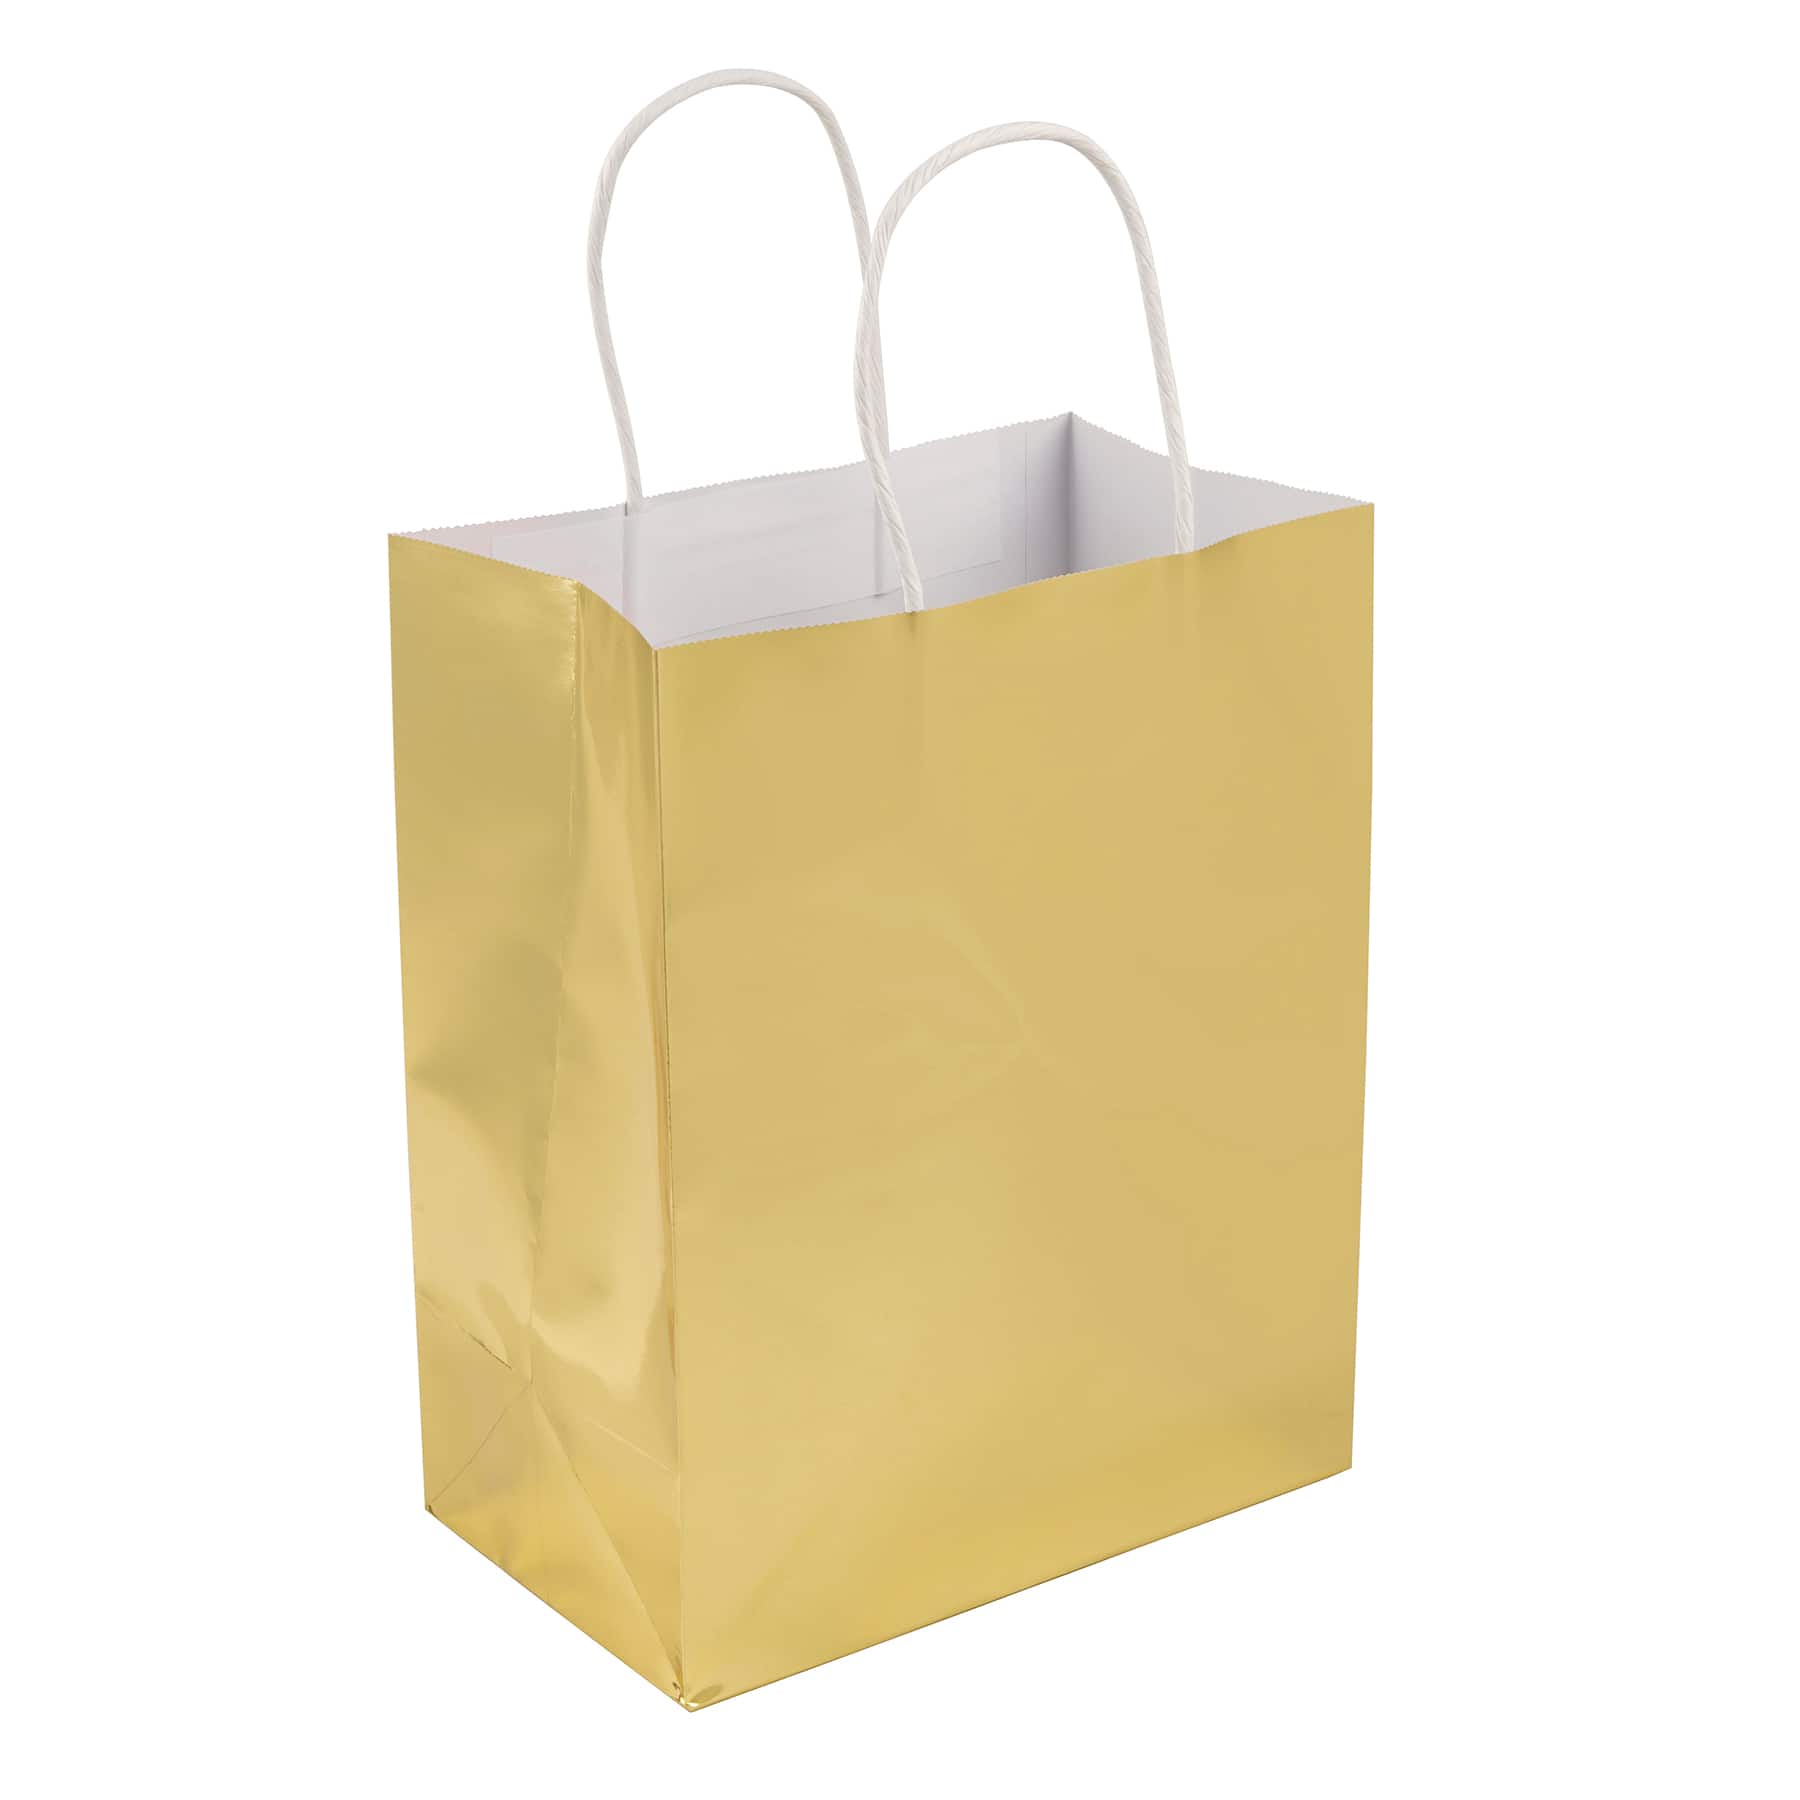 6 Packs: 13 ct. (78 total) Medium Gold Gift Bag Value Pack by Celebrate It&#x2122;